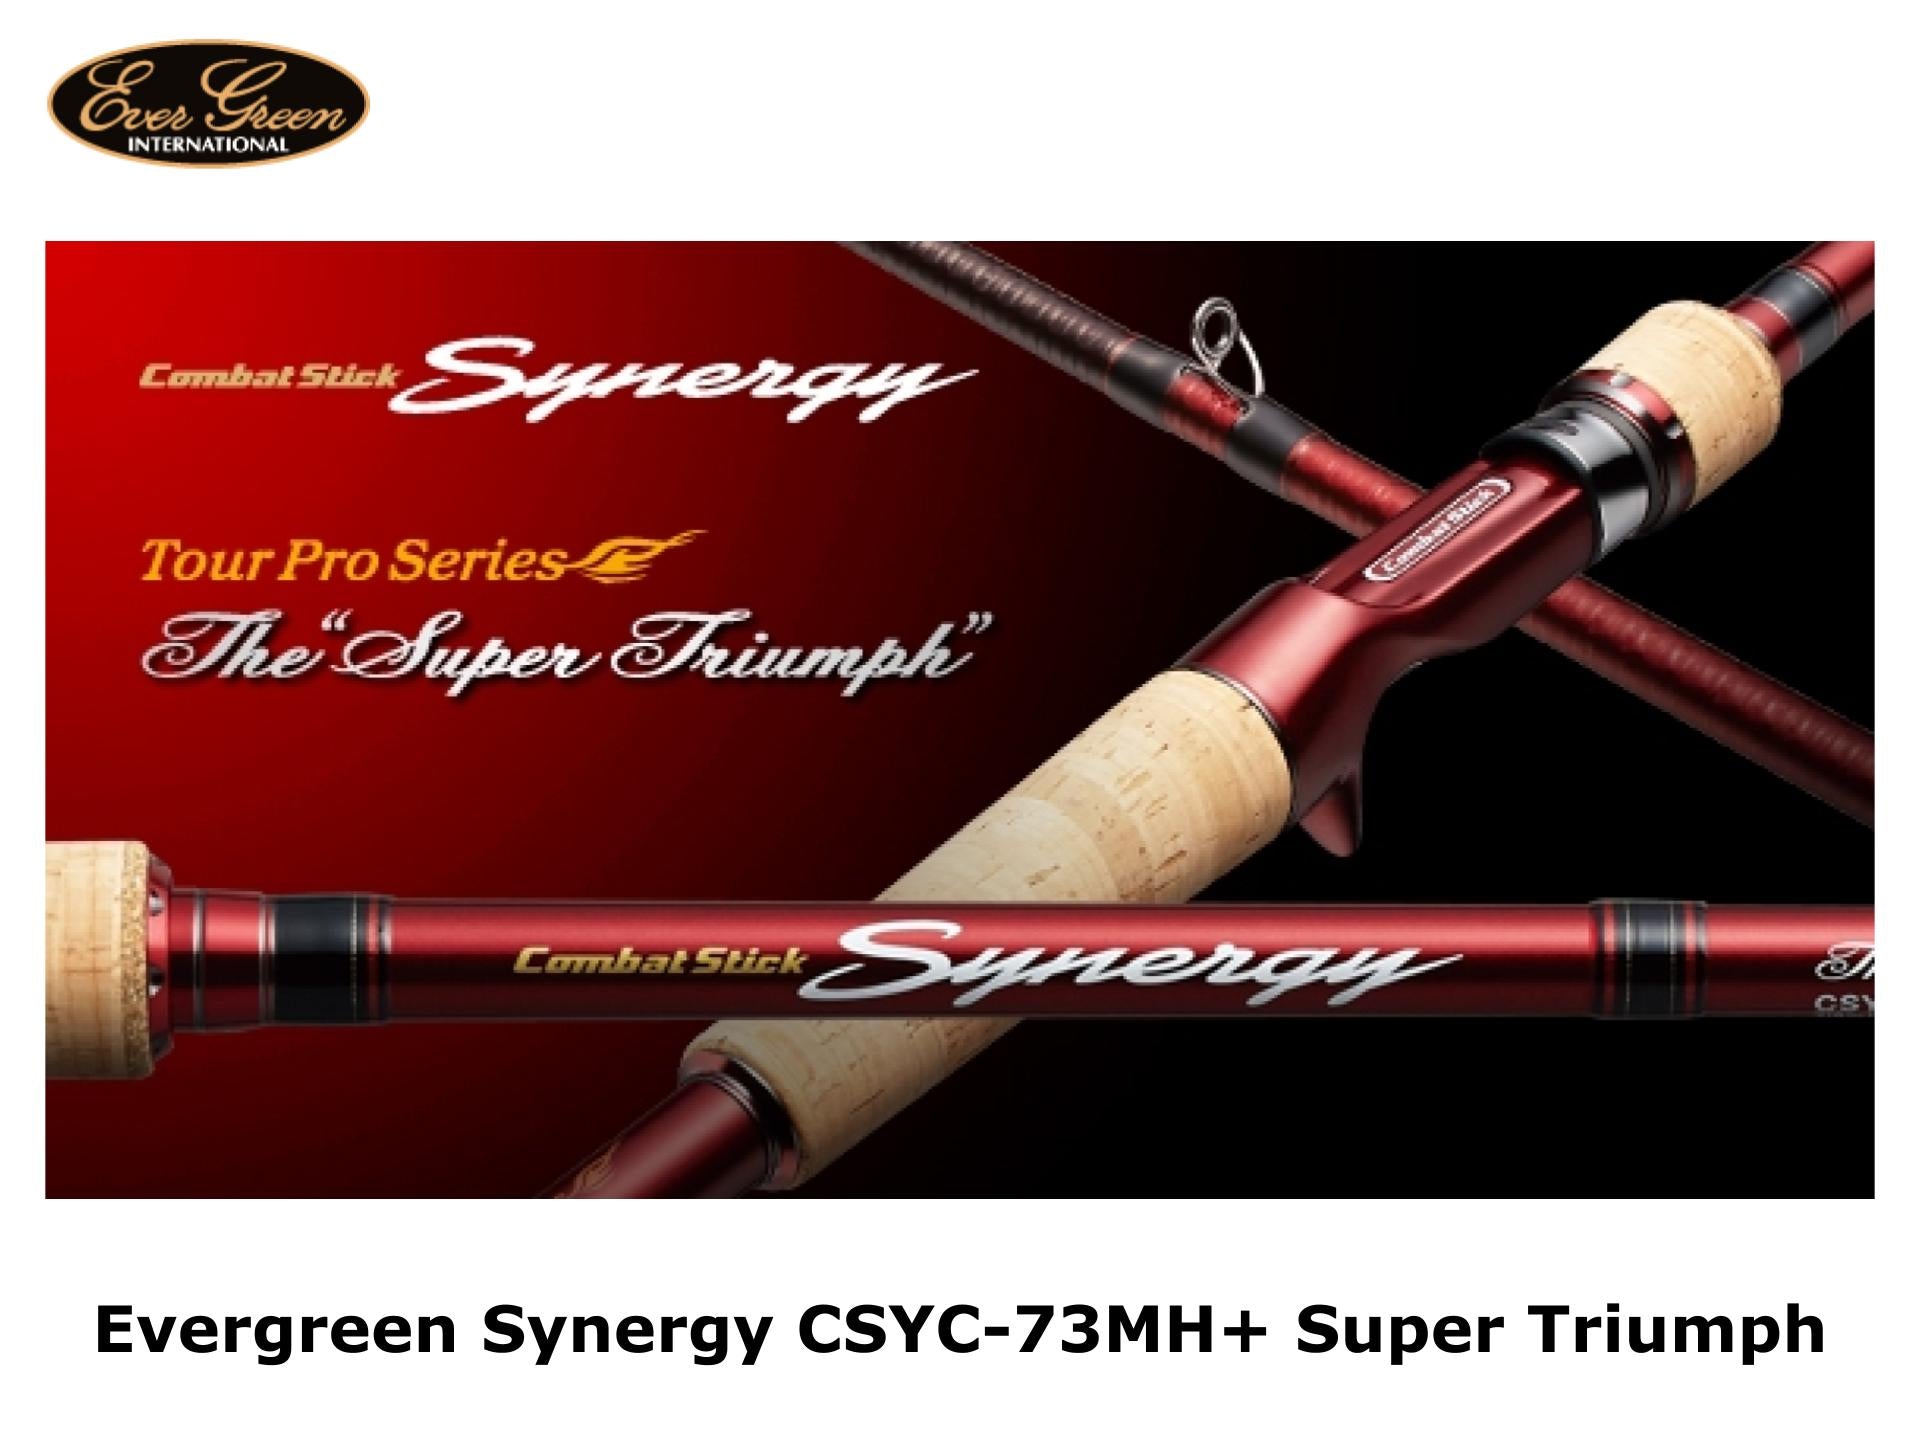 Evergreen Synergy CSYC-73MH+ Super Triumph – JDM TACKLE HEAVEN